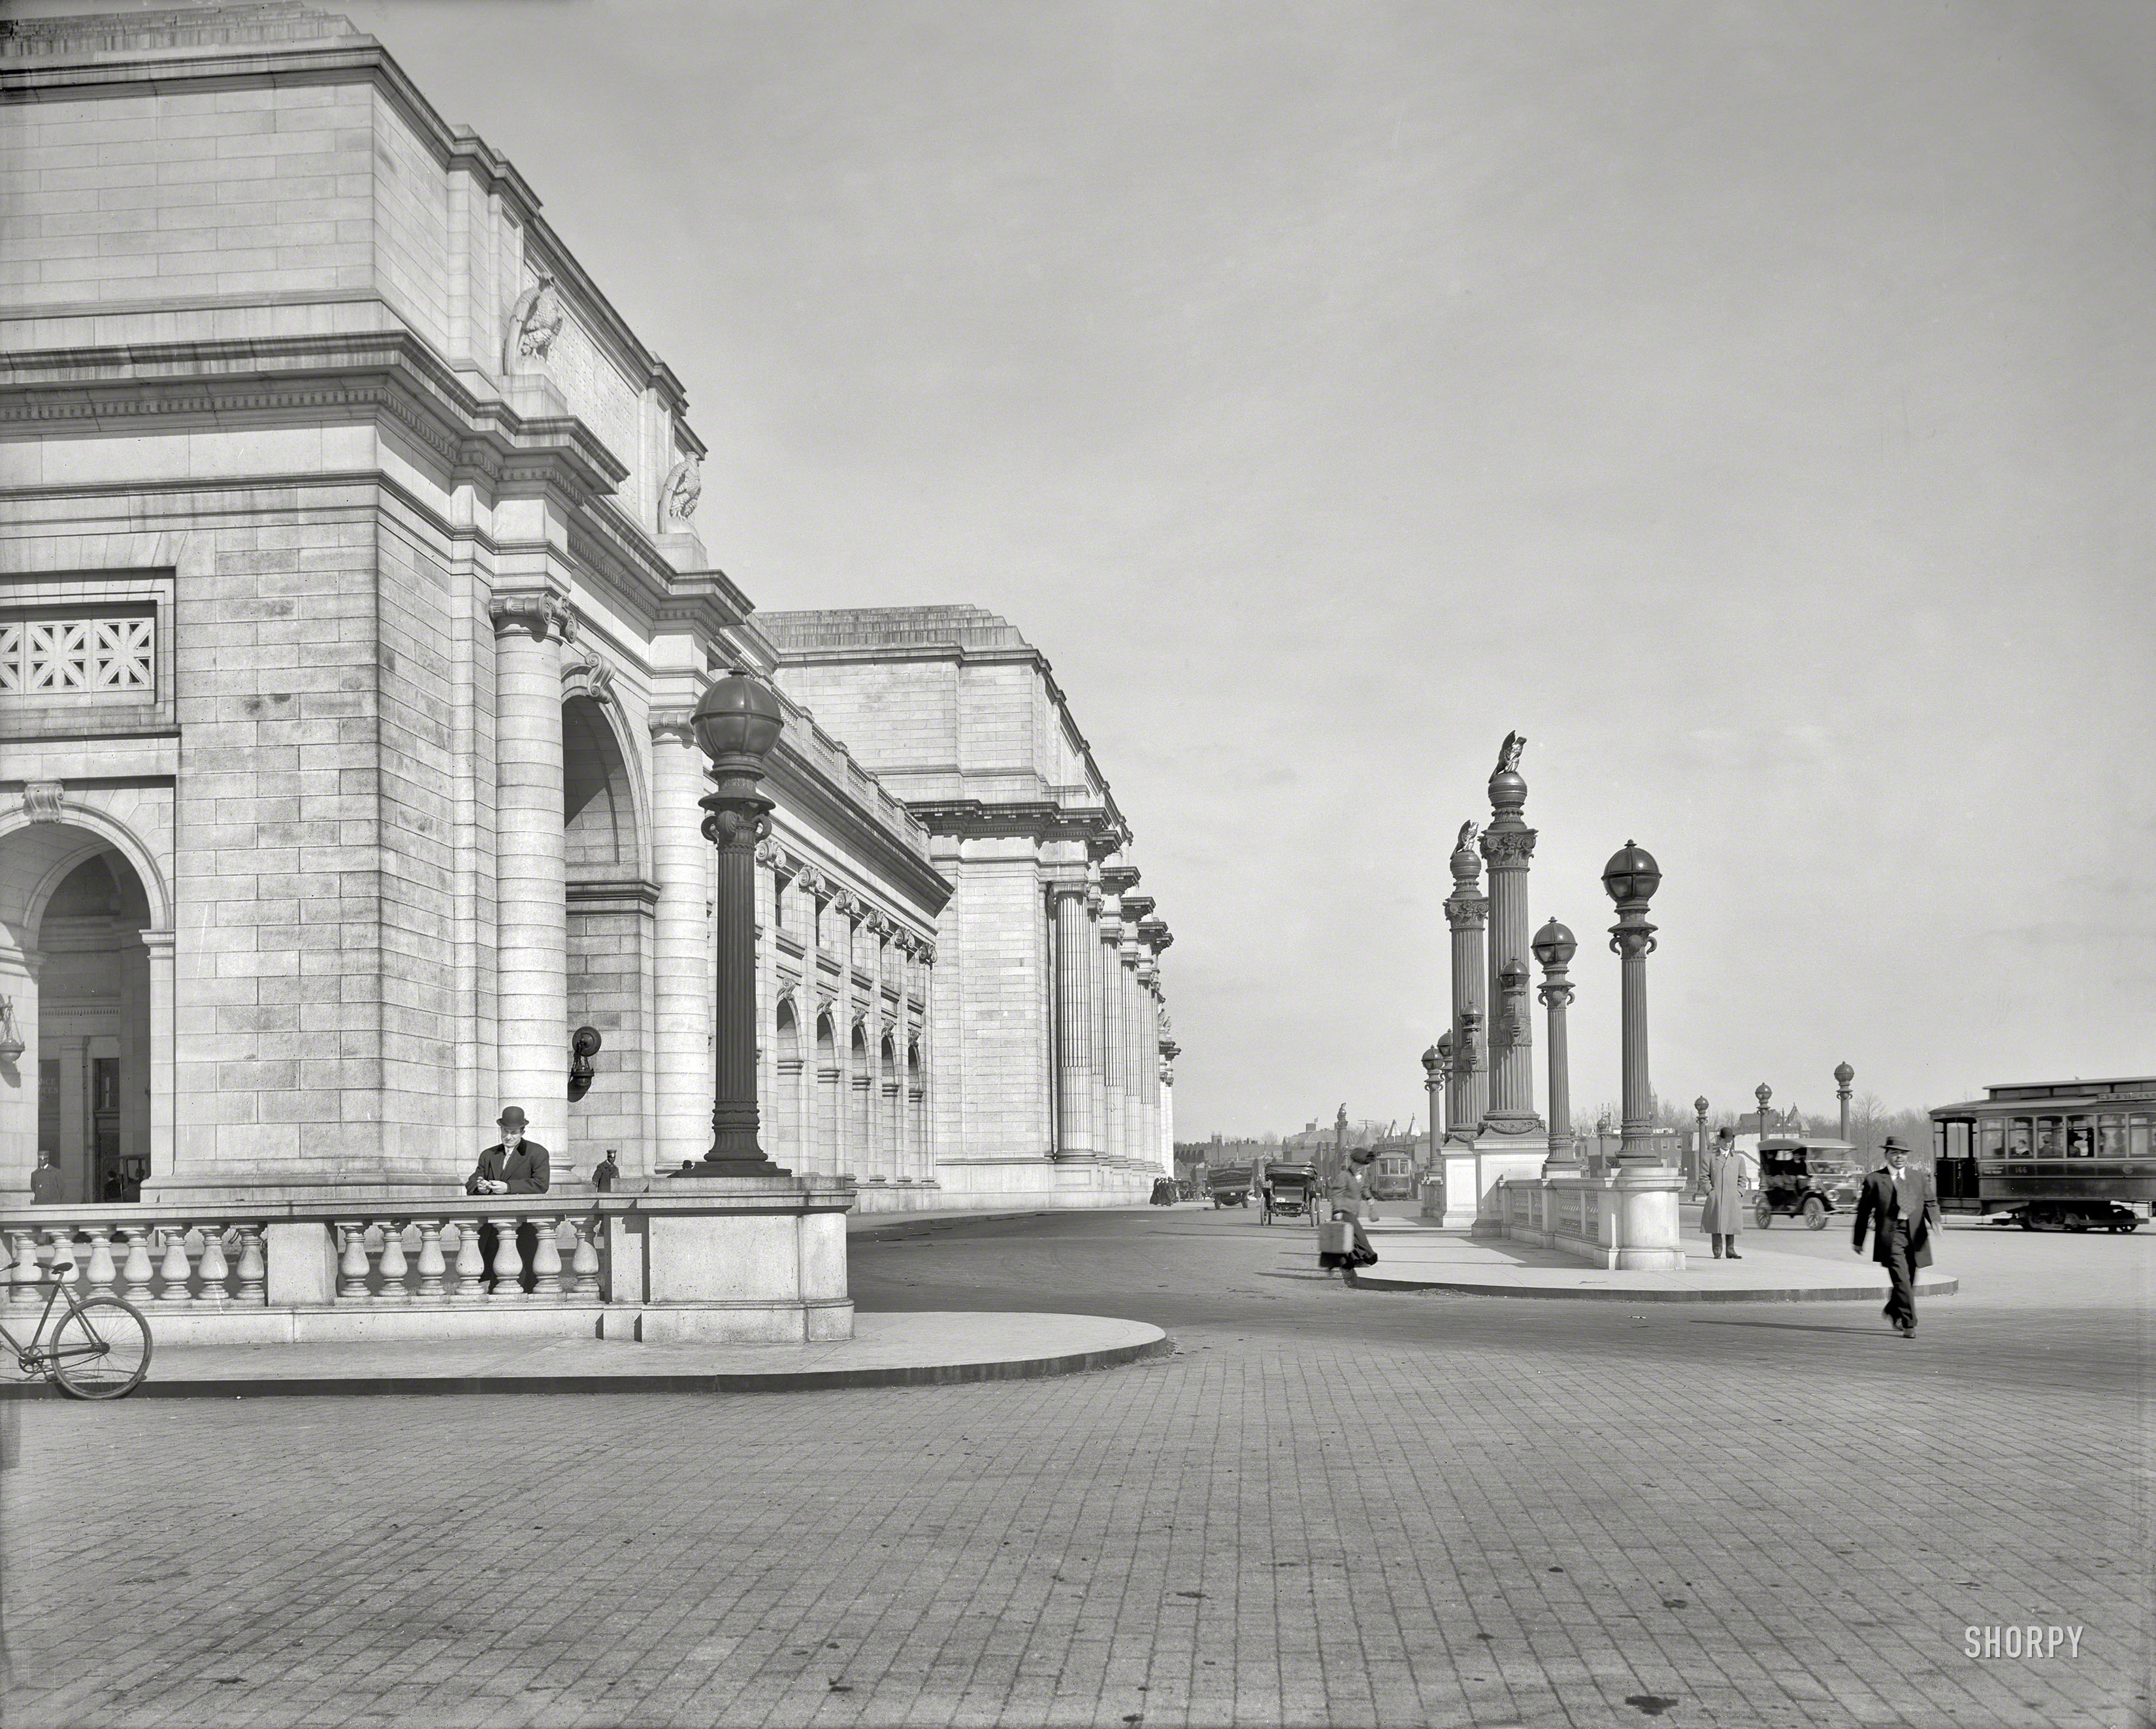 Washington, D.C., circa 1908. "South facade, new Union Station." At least five modes of transportation represented in this detailed view. 8x10 inch dry plate glass negative, Detroit Publishing Company. View full size.